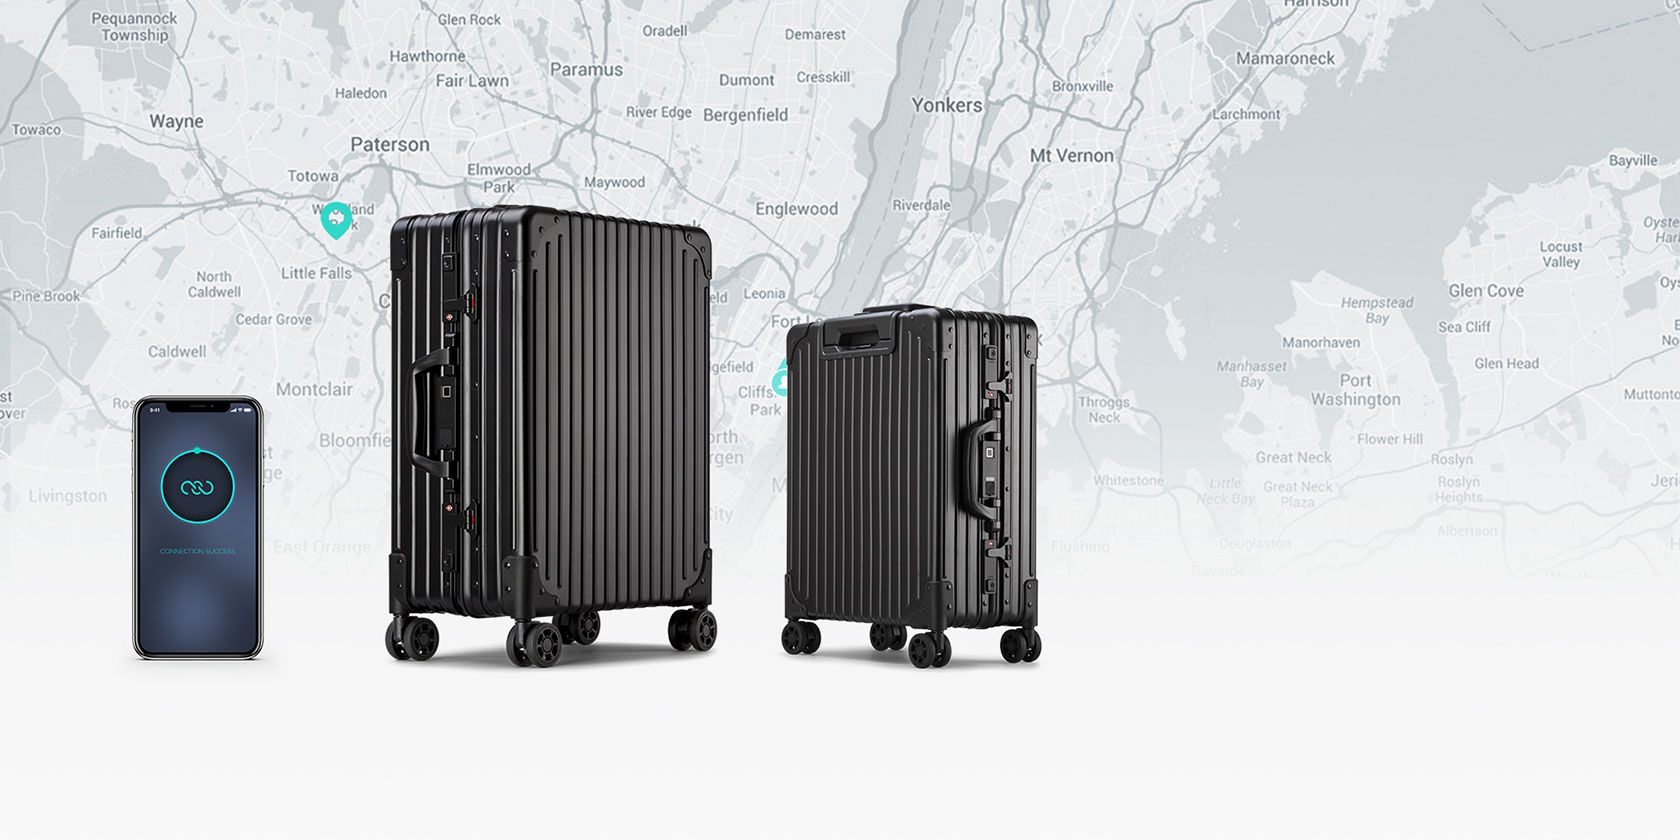 The NOVI Smart Luggage Is Trackable, Self-Weighing, and Super Affordable